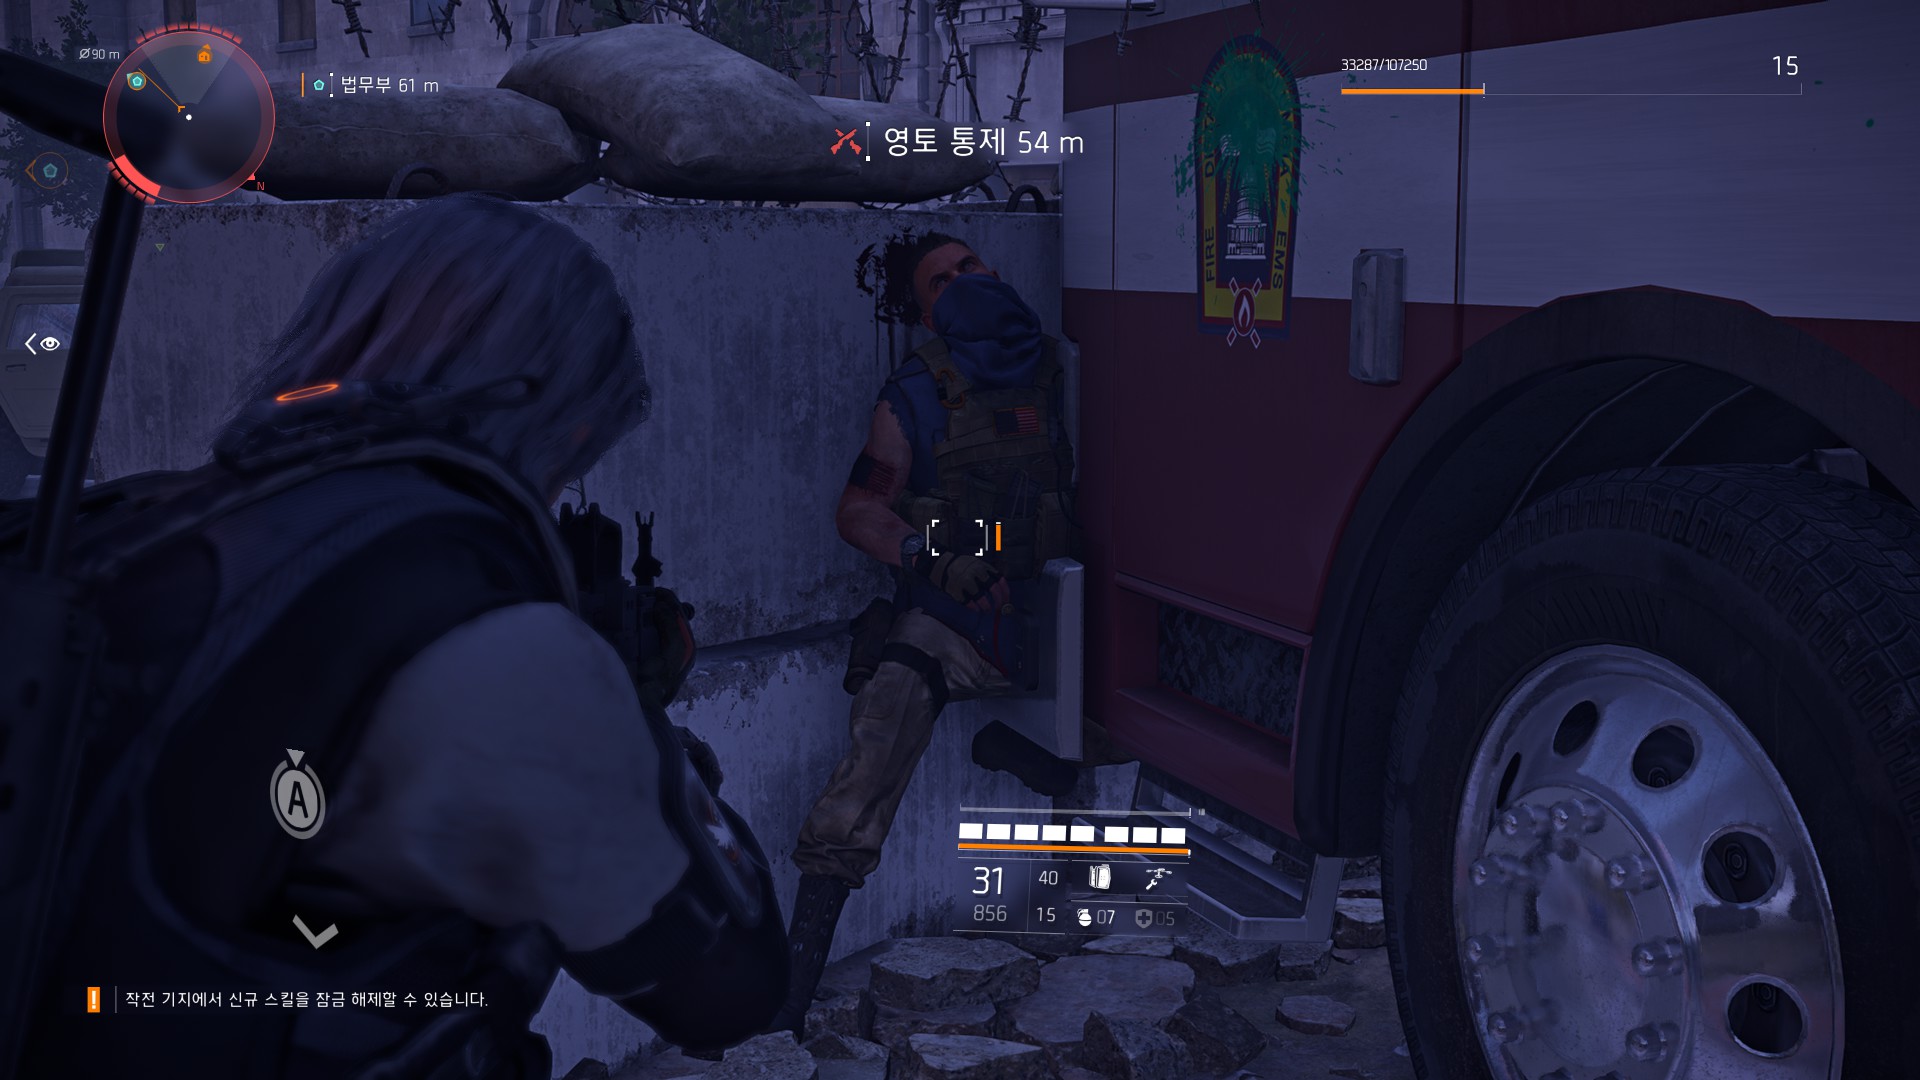 Tom Clancy's The Division® 22019-3-29-21-13-6.jpg